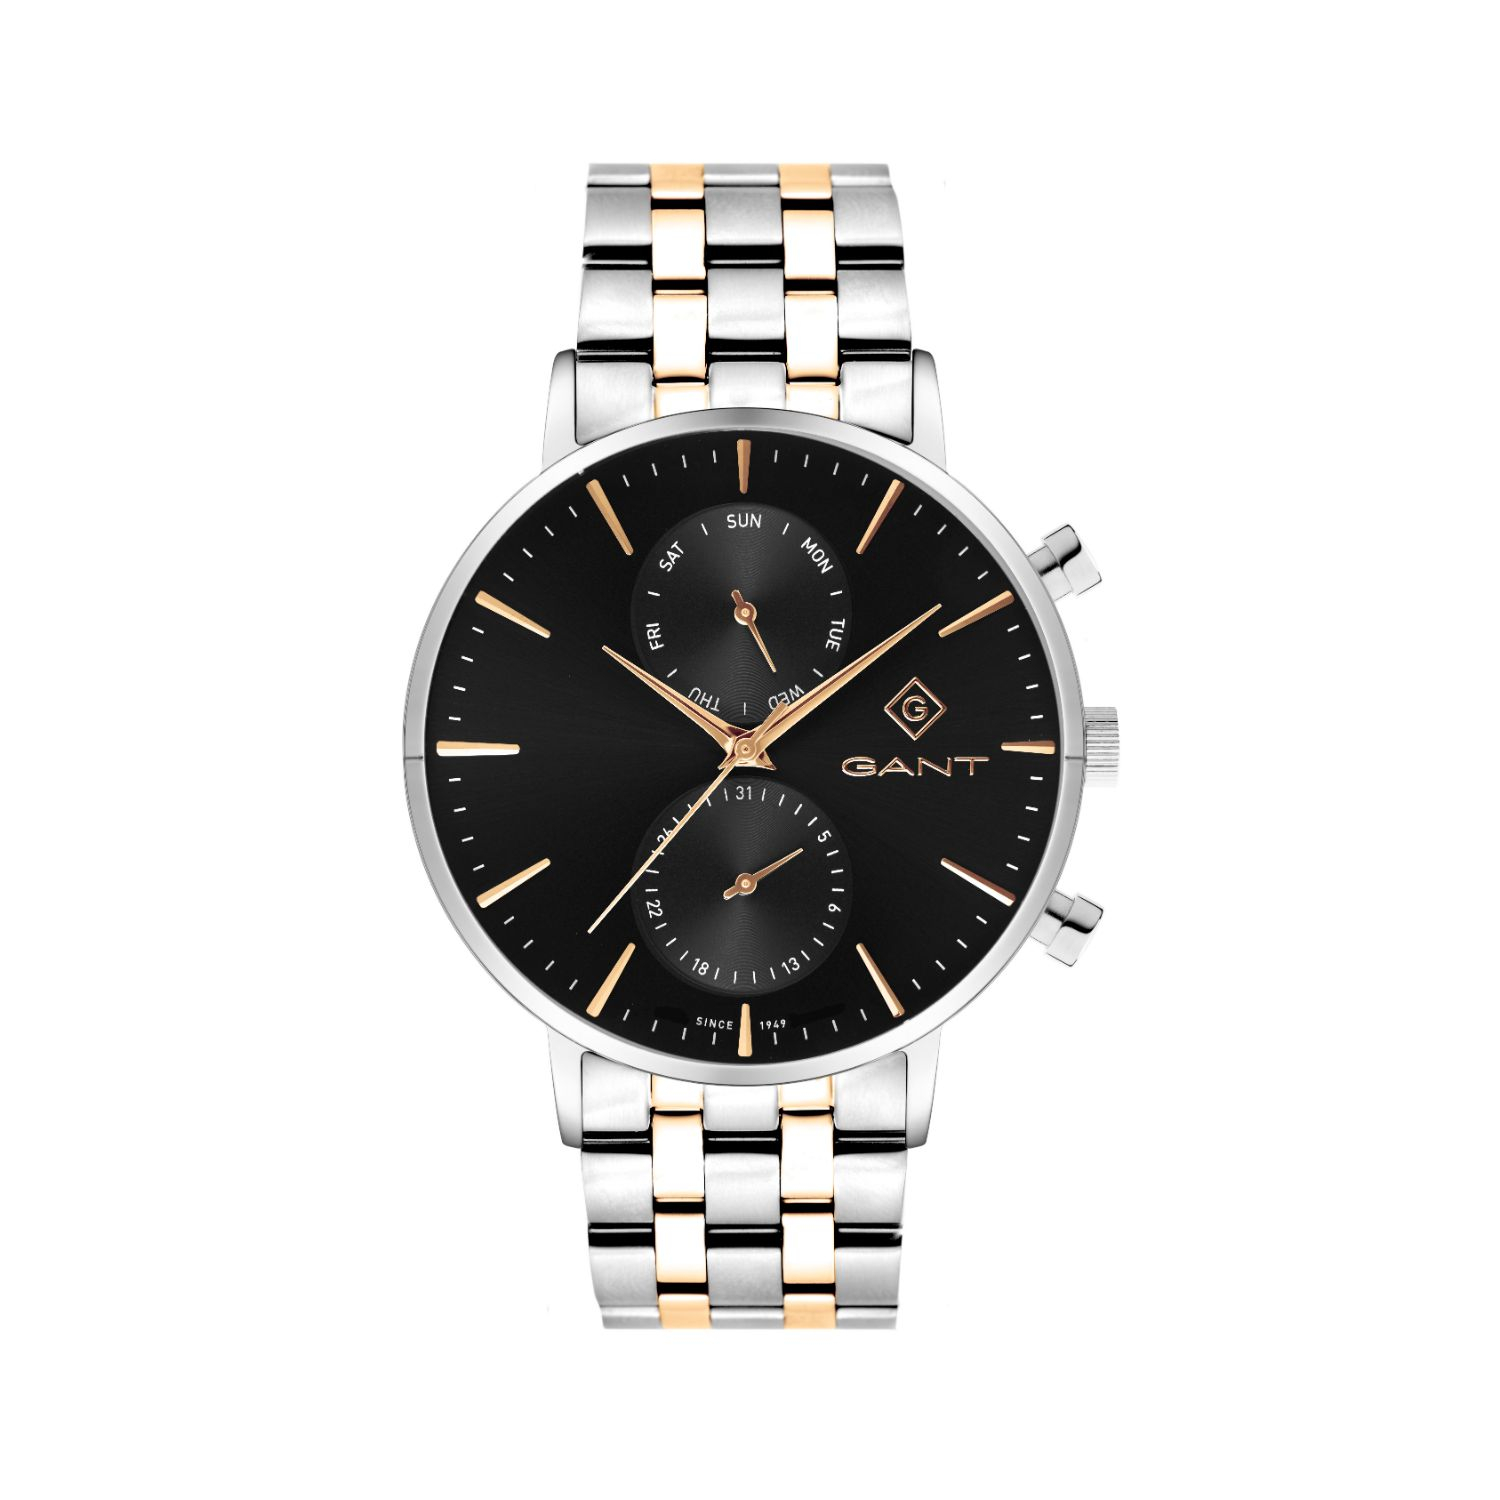 Mens GANT stainless steel watch with black dial and two-tone bracelet.